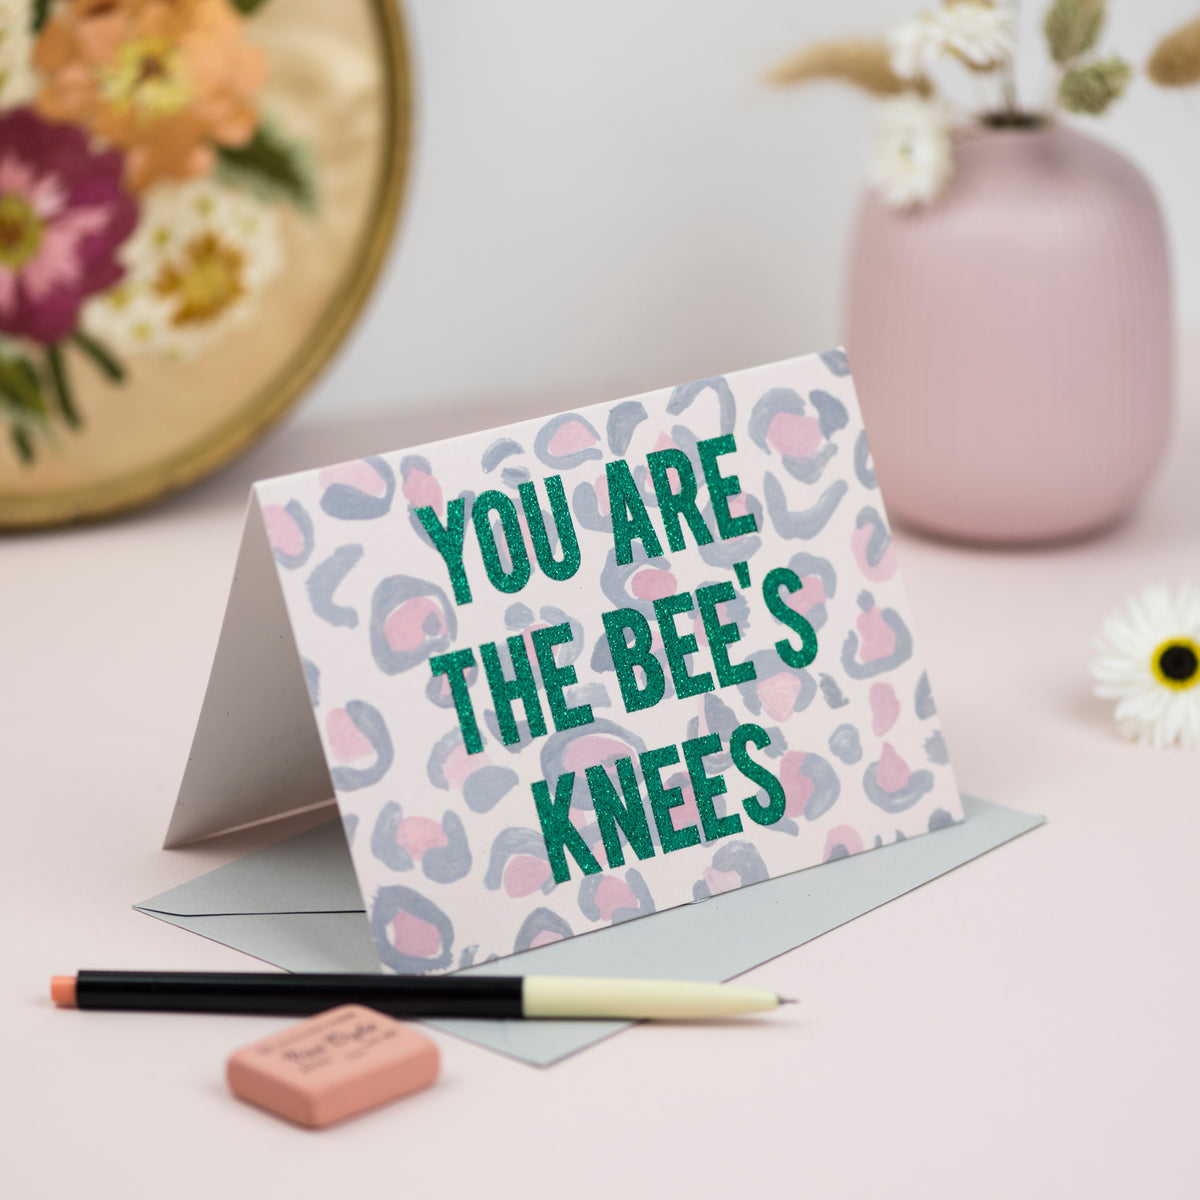 'You Are the Bee's Knees' Leopard Print Greetings Card - Biodegradable Glitter